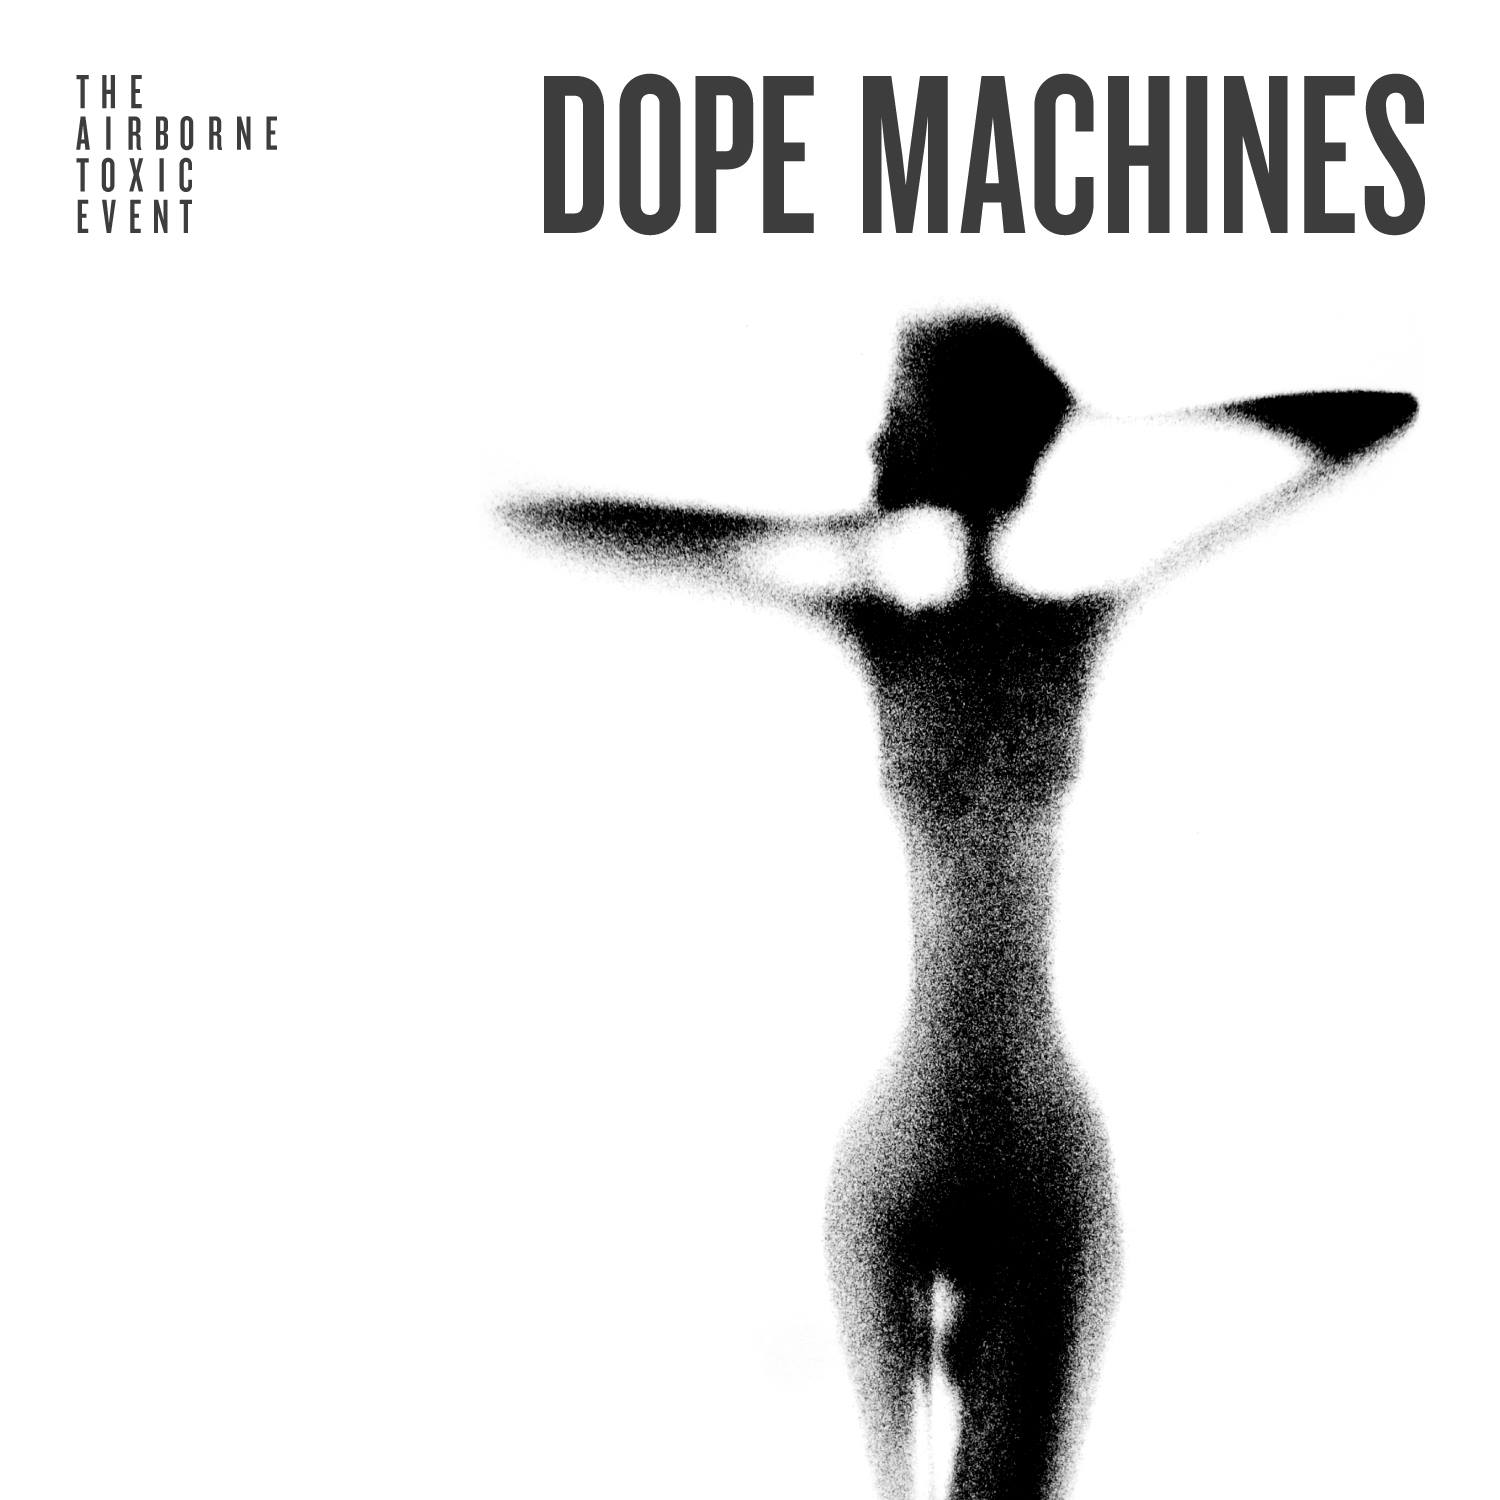 Dope Machines - The Airborne Toxic Event